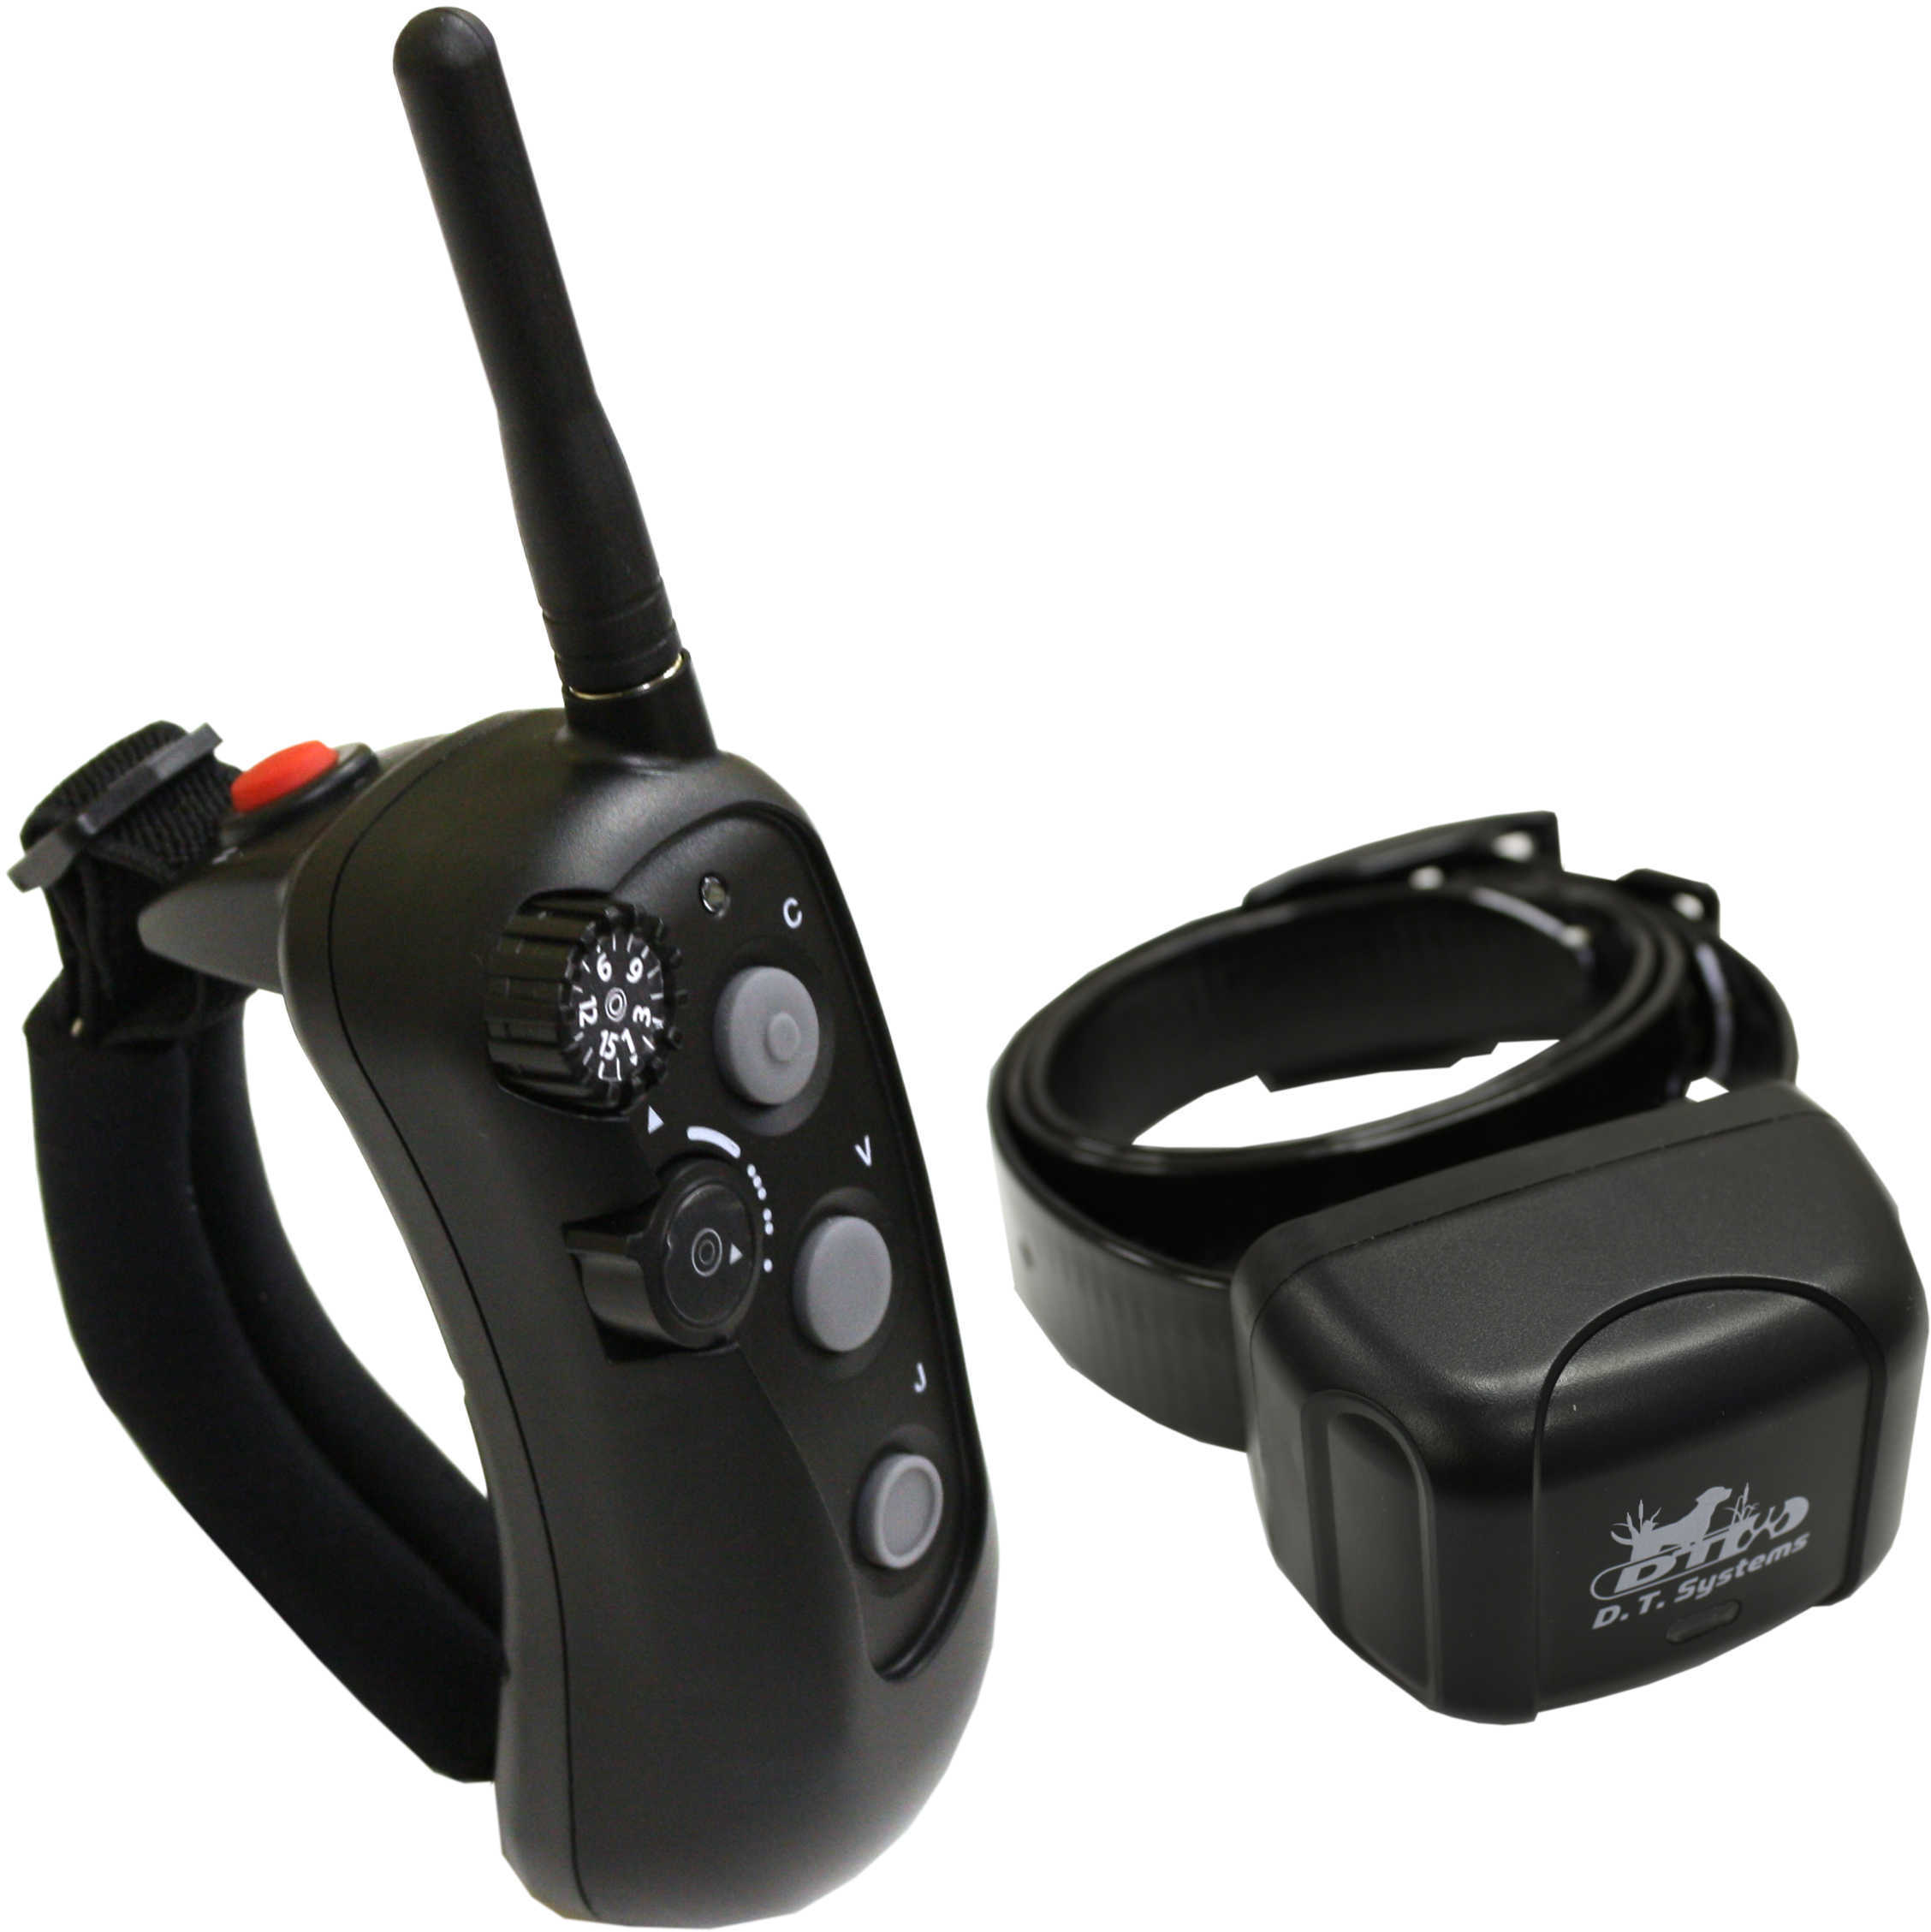 D.T. Systems R.A.P.T. 1400 Dog Training E-Collar-Black